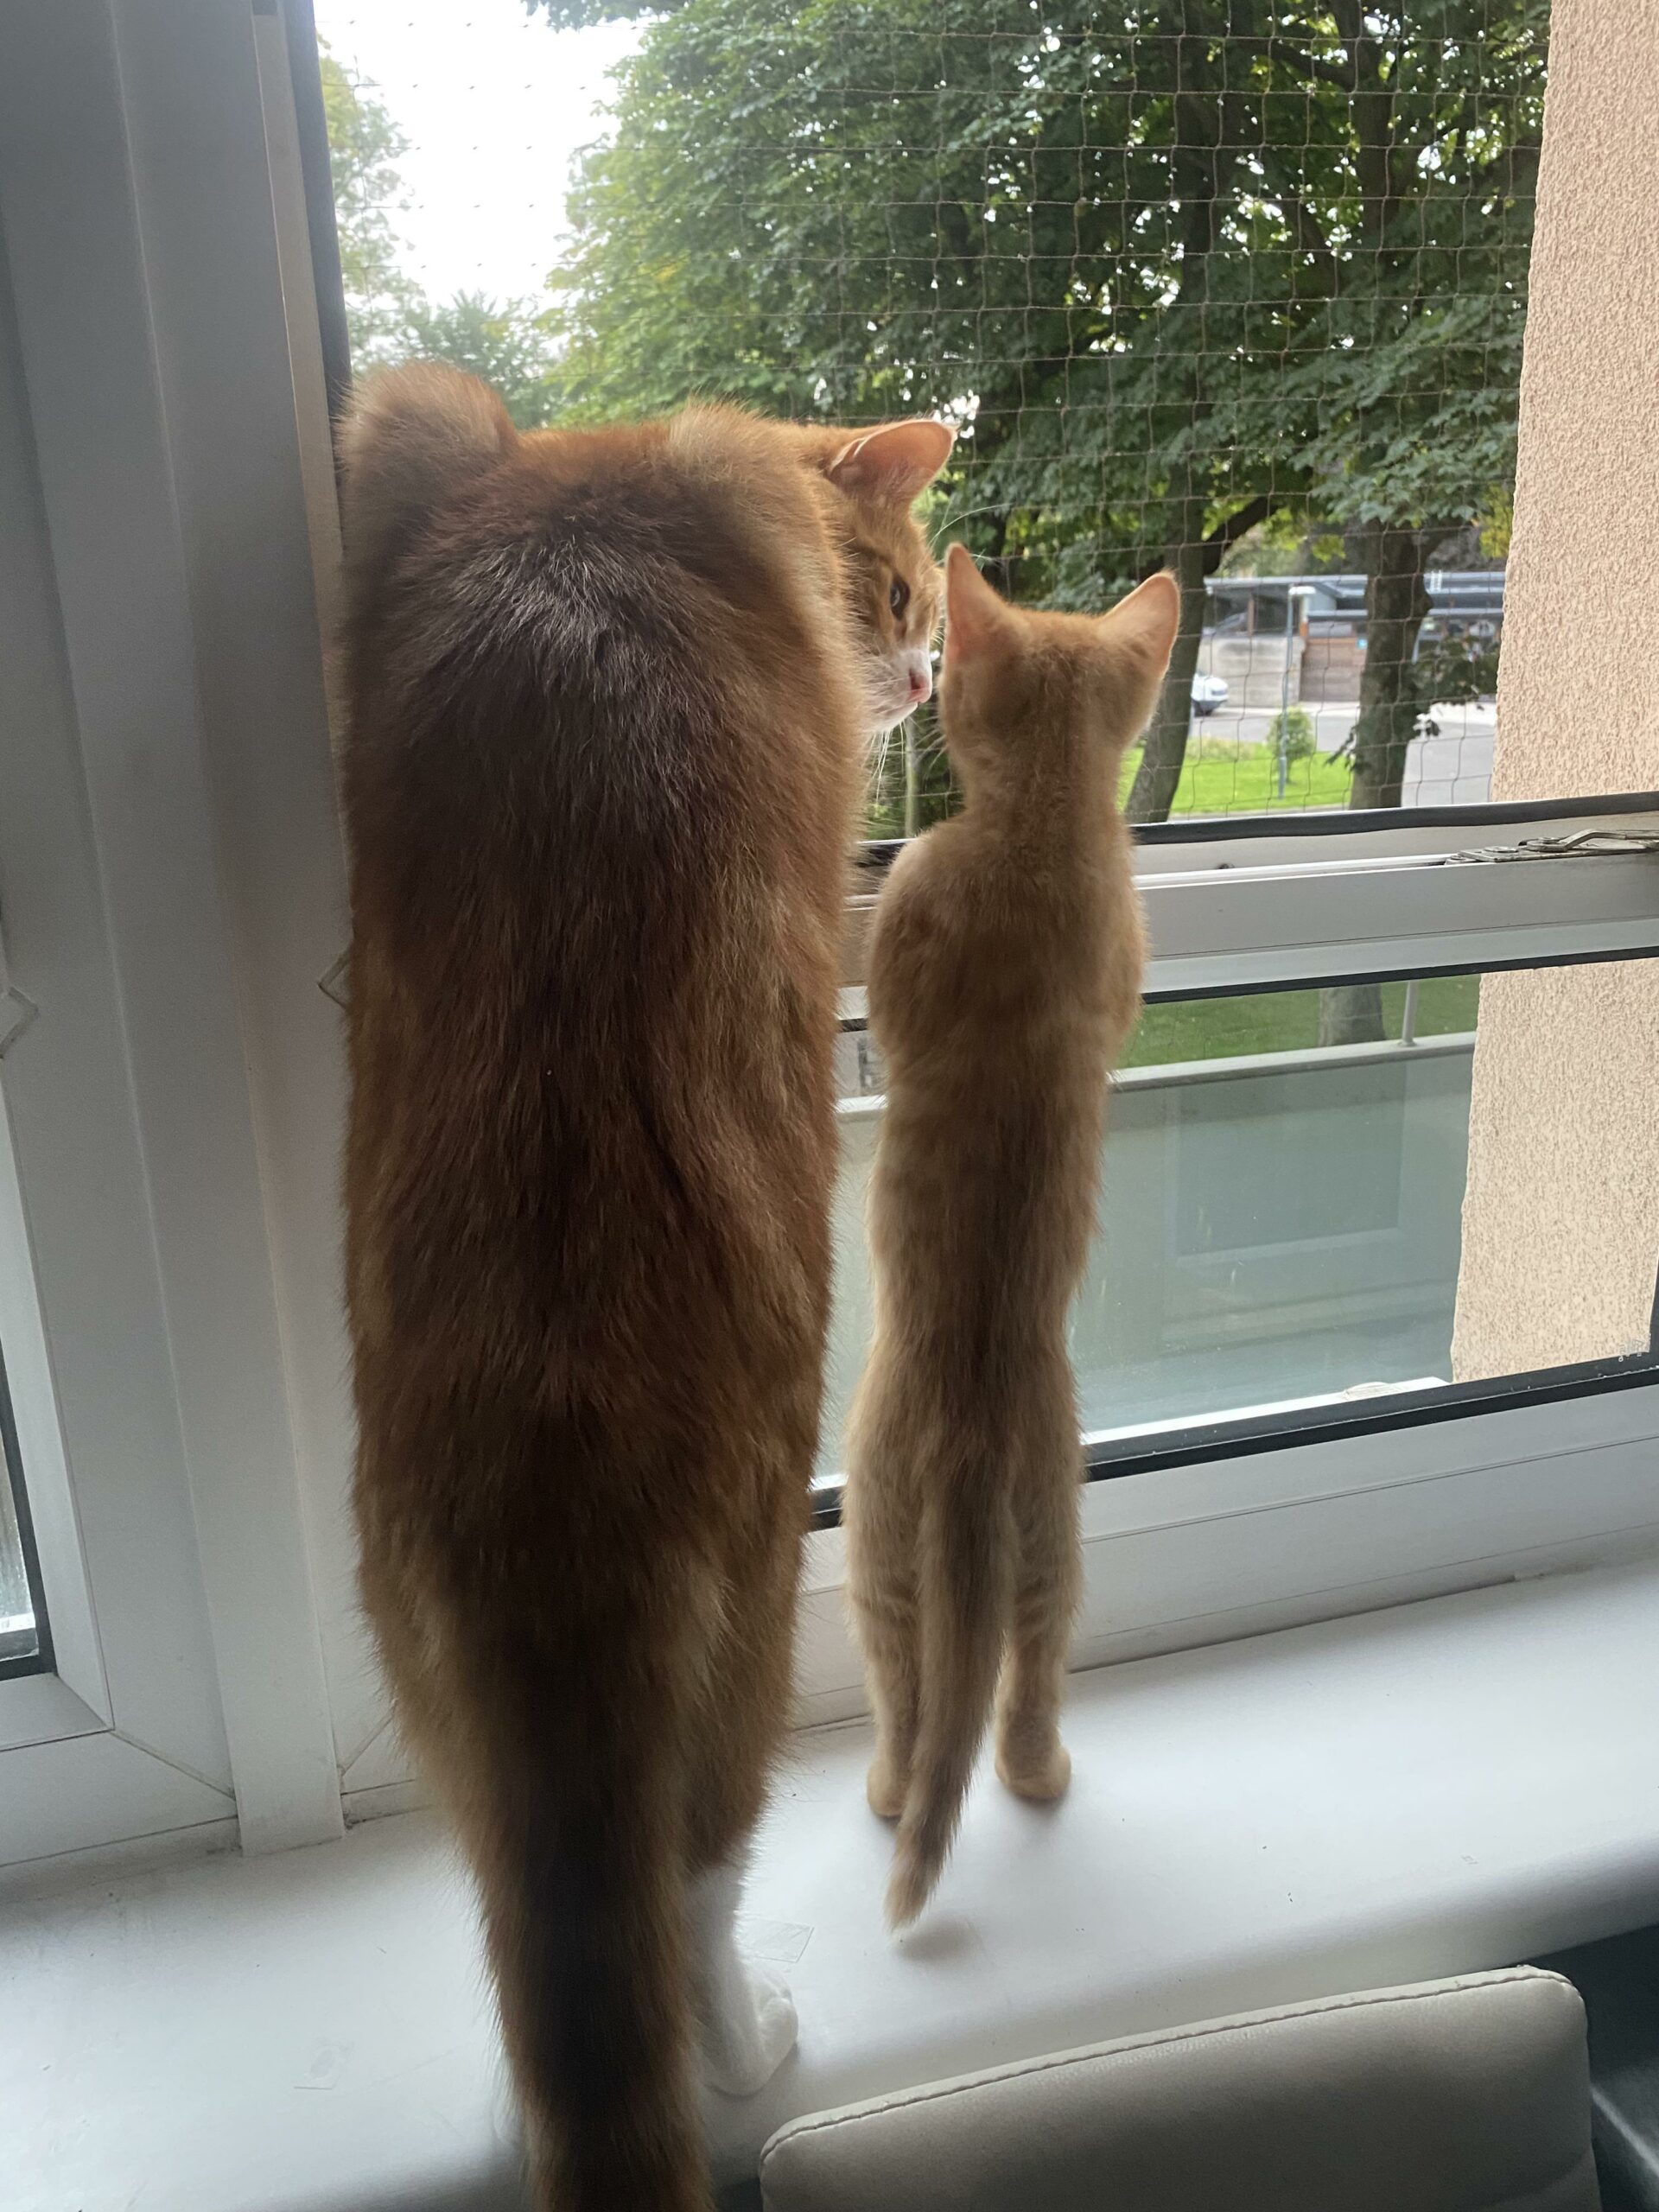 big orange cat and little orange cat standing on hind legs looking out window.